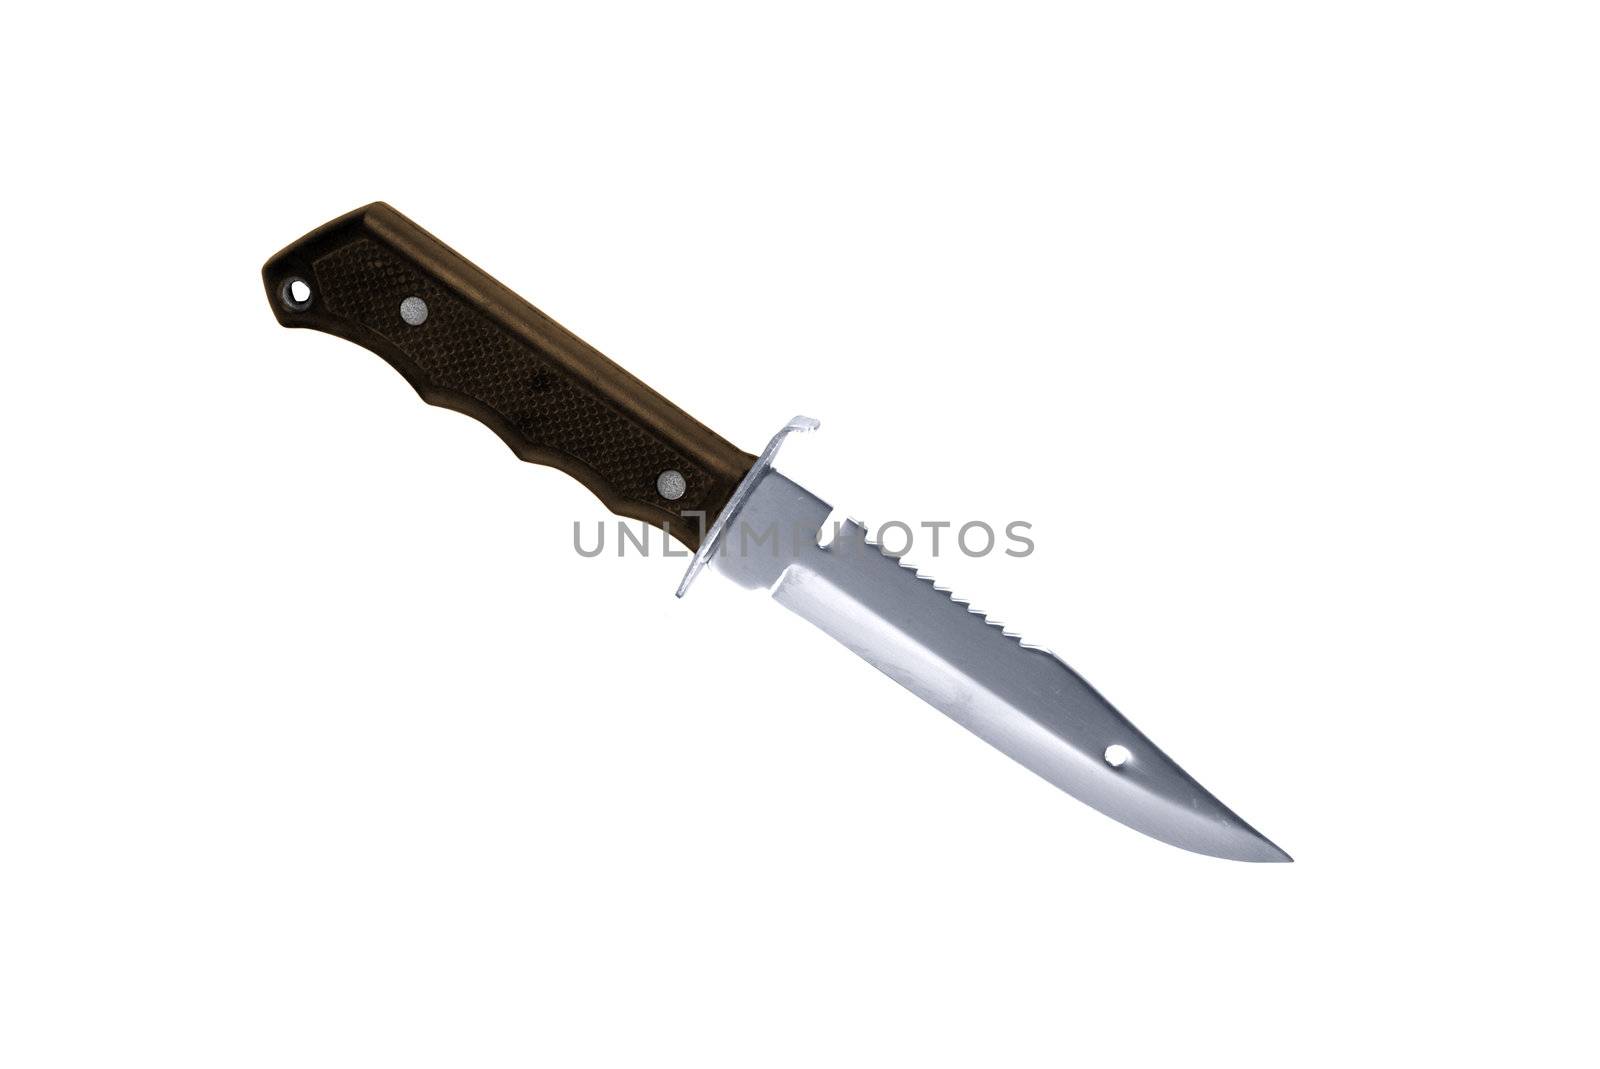 hunter combat hand made knife isolated on white background